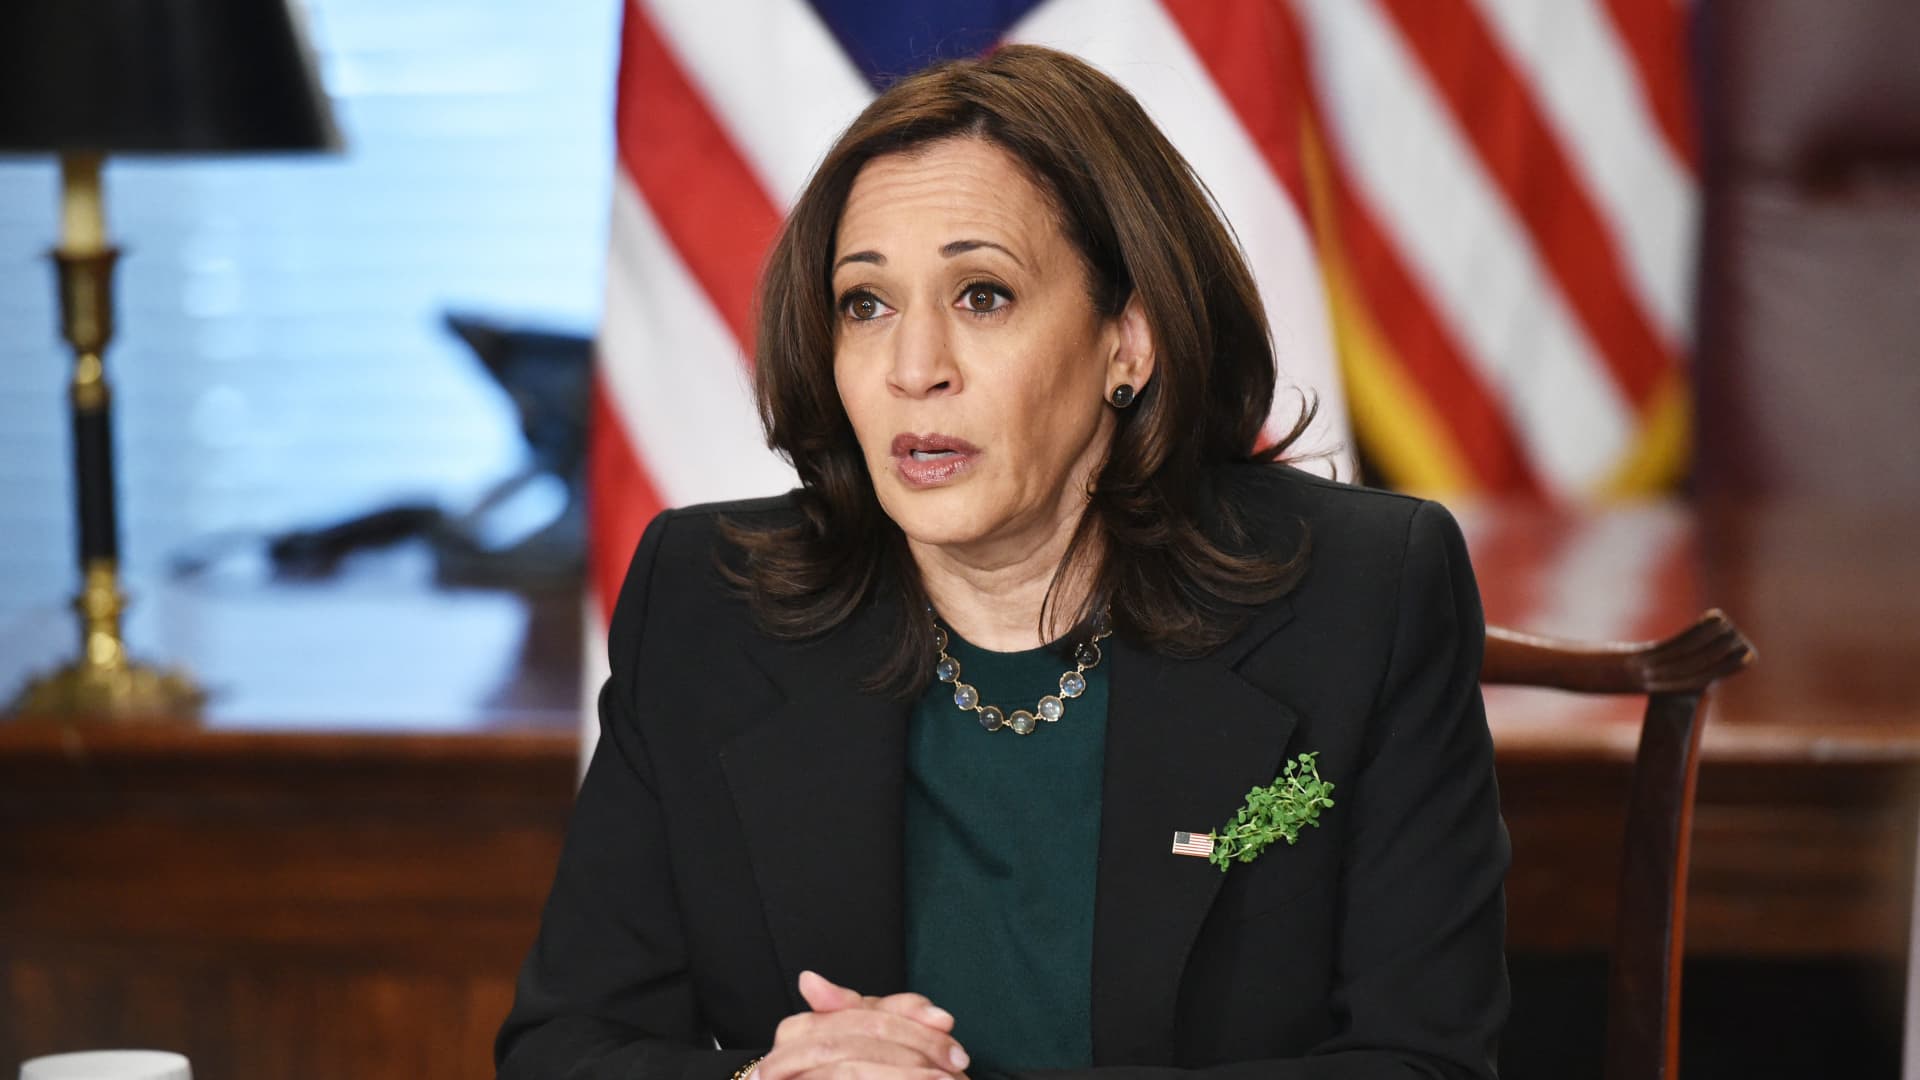 Vice President Kamala Harris speaks on the Atlanta area shootings before a virtual bilateral meeting with Ireland's Prime Minister Micheal Martin in the Vice President's Ceremonial Office in the Eisenhower Executive Office Building, next to the White House in Washington, DC on March 17, 2021.